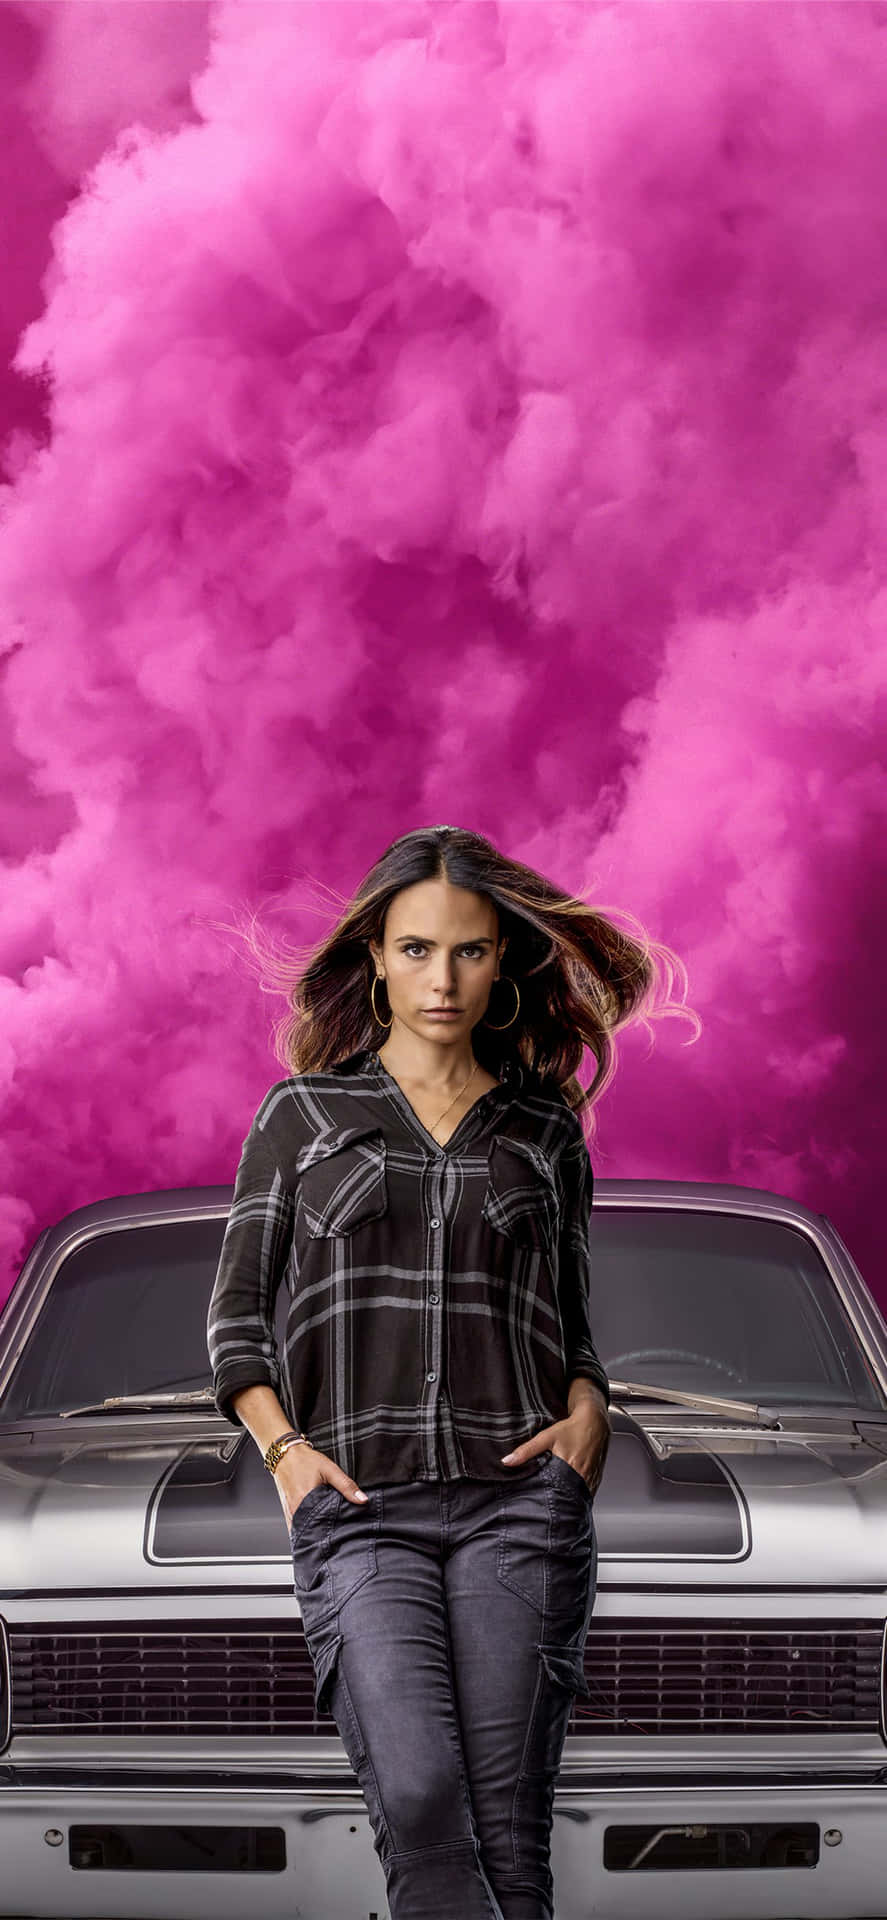 A Woman Standing Next To A Car With Pink Clouds Wallpaper